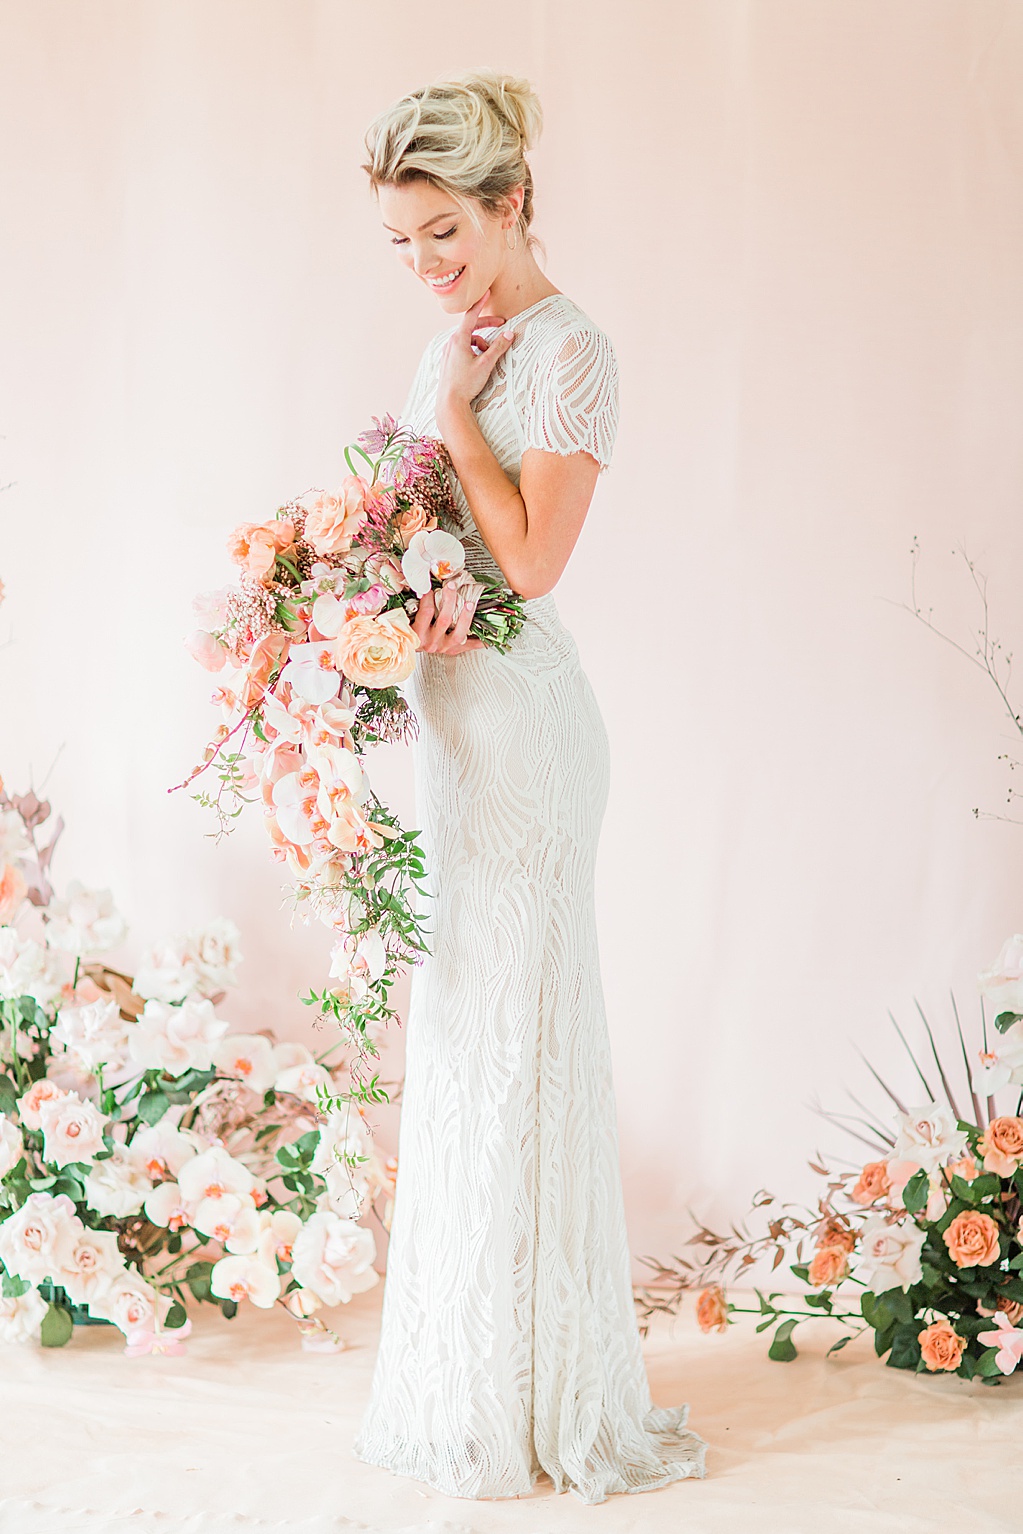 Blush mauve peach and coral wedding inspiration at Prospect House in Dripping Springs Texas wedding venue by Allison Jeffers Photography 0033